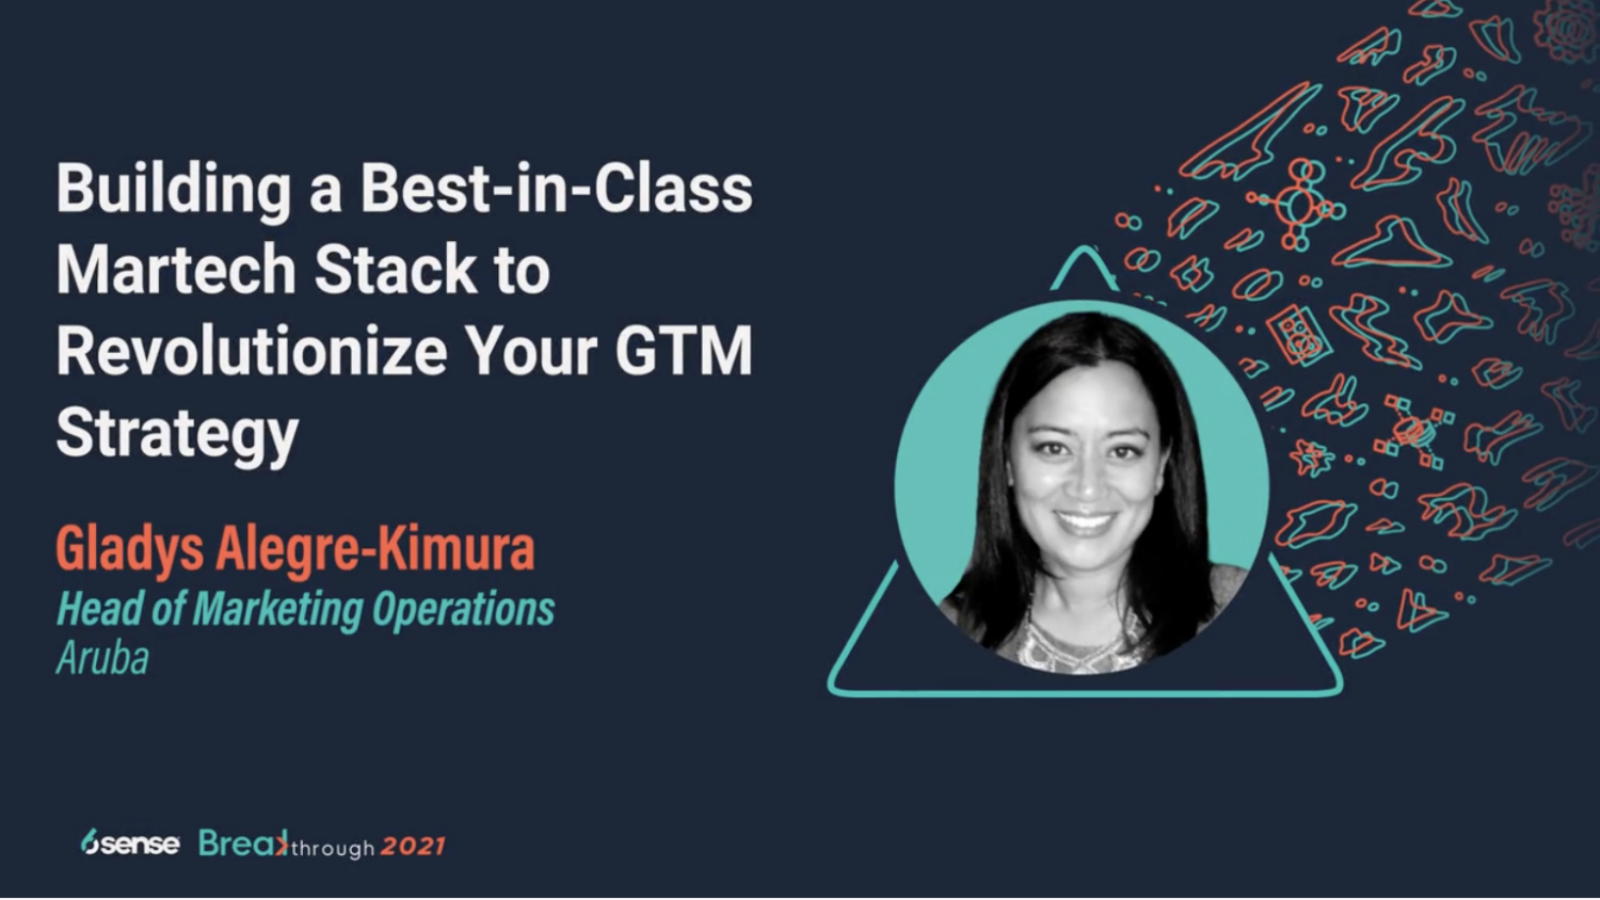 Building a Best-in-Class Martech Stack to Revolutionize Your GTM Strategy